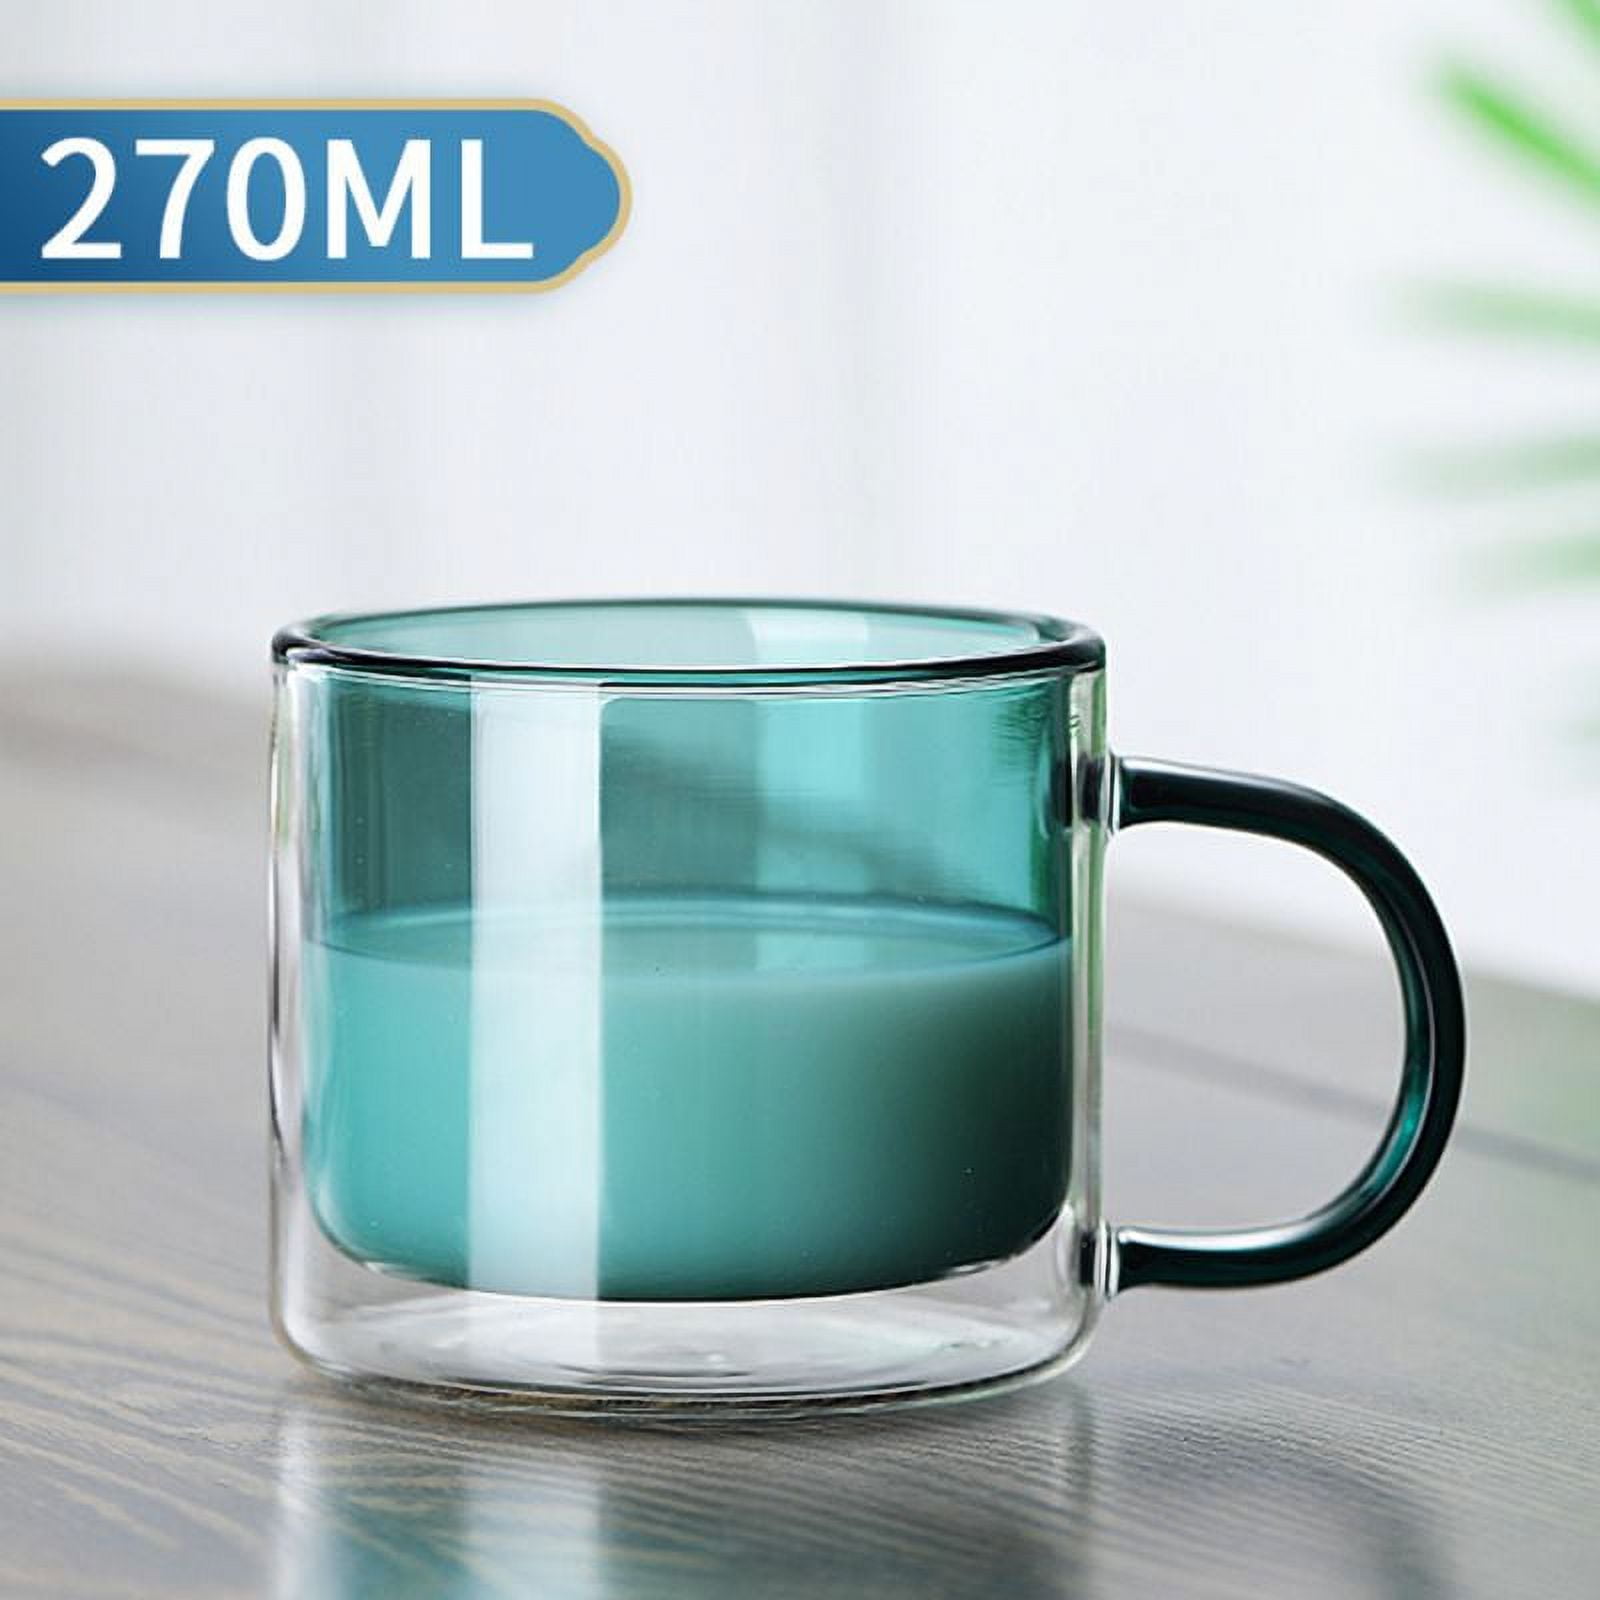 BNUNWISH Double Wall Glass Expresso Coffee Mugs Set Of 4 (7 OZ / 200 ML)  Insulted Clear Cappuccino Coffee Mugs Tea Cups …